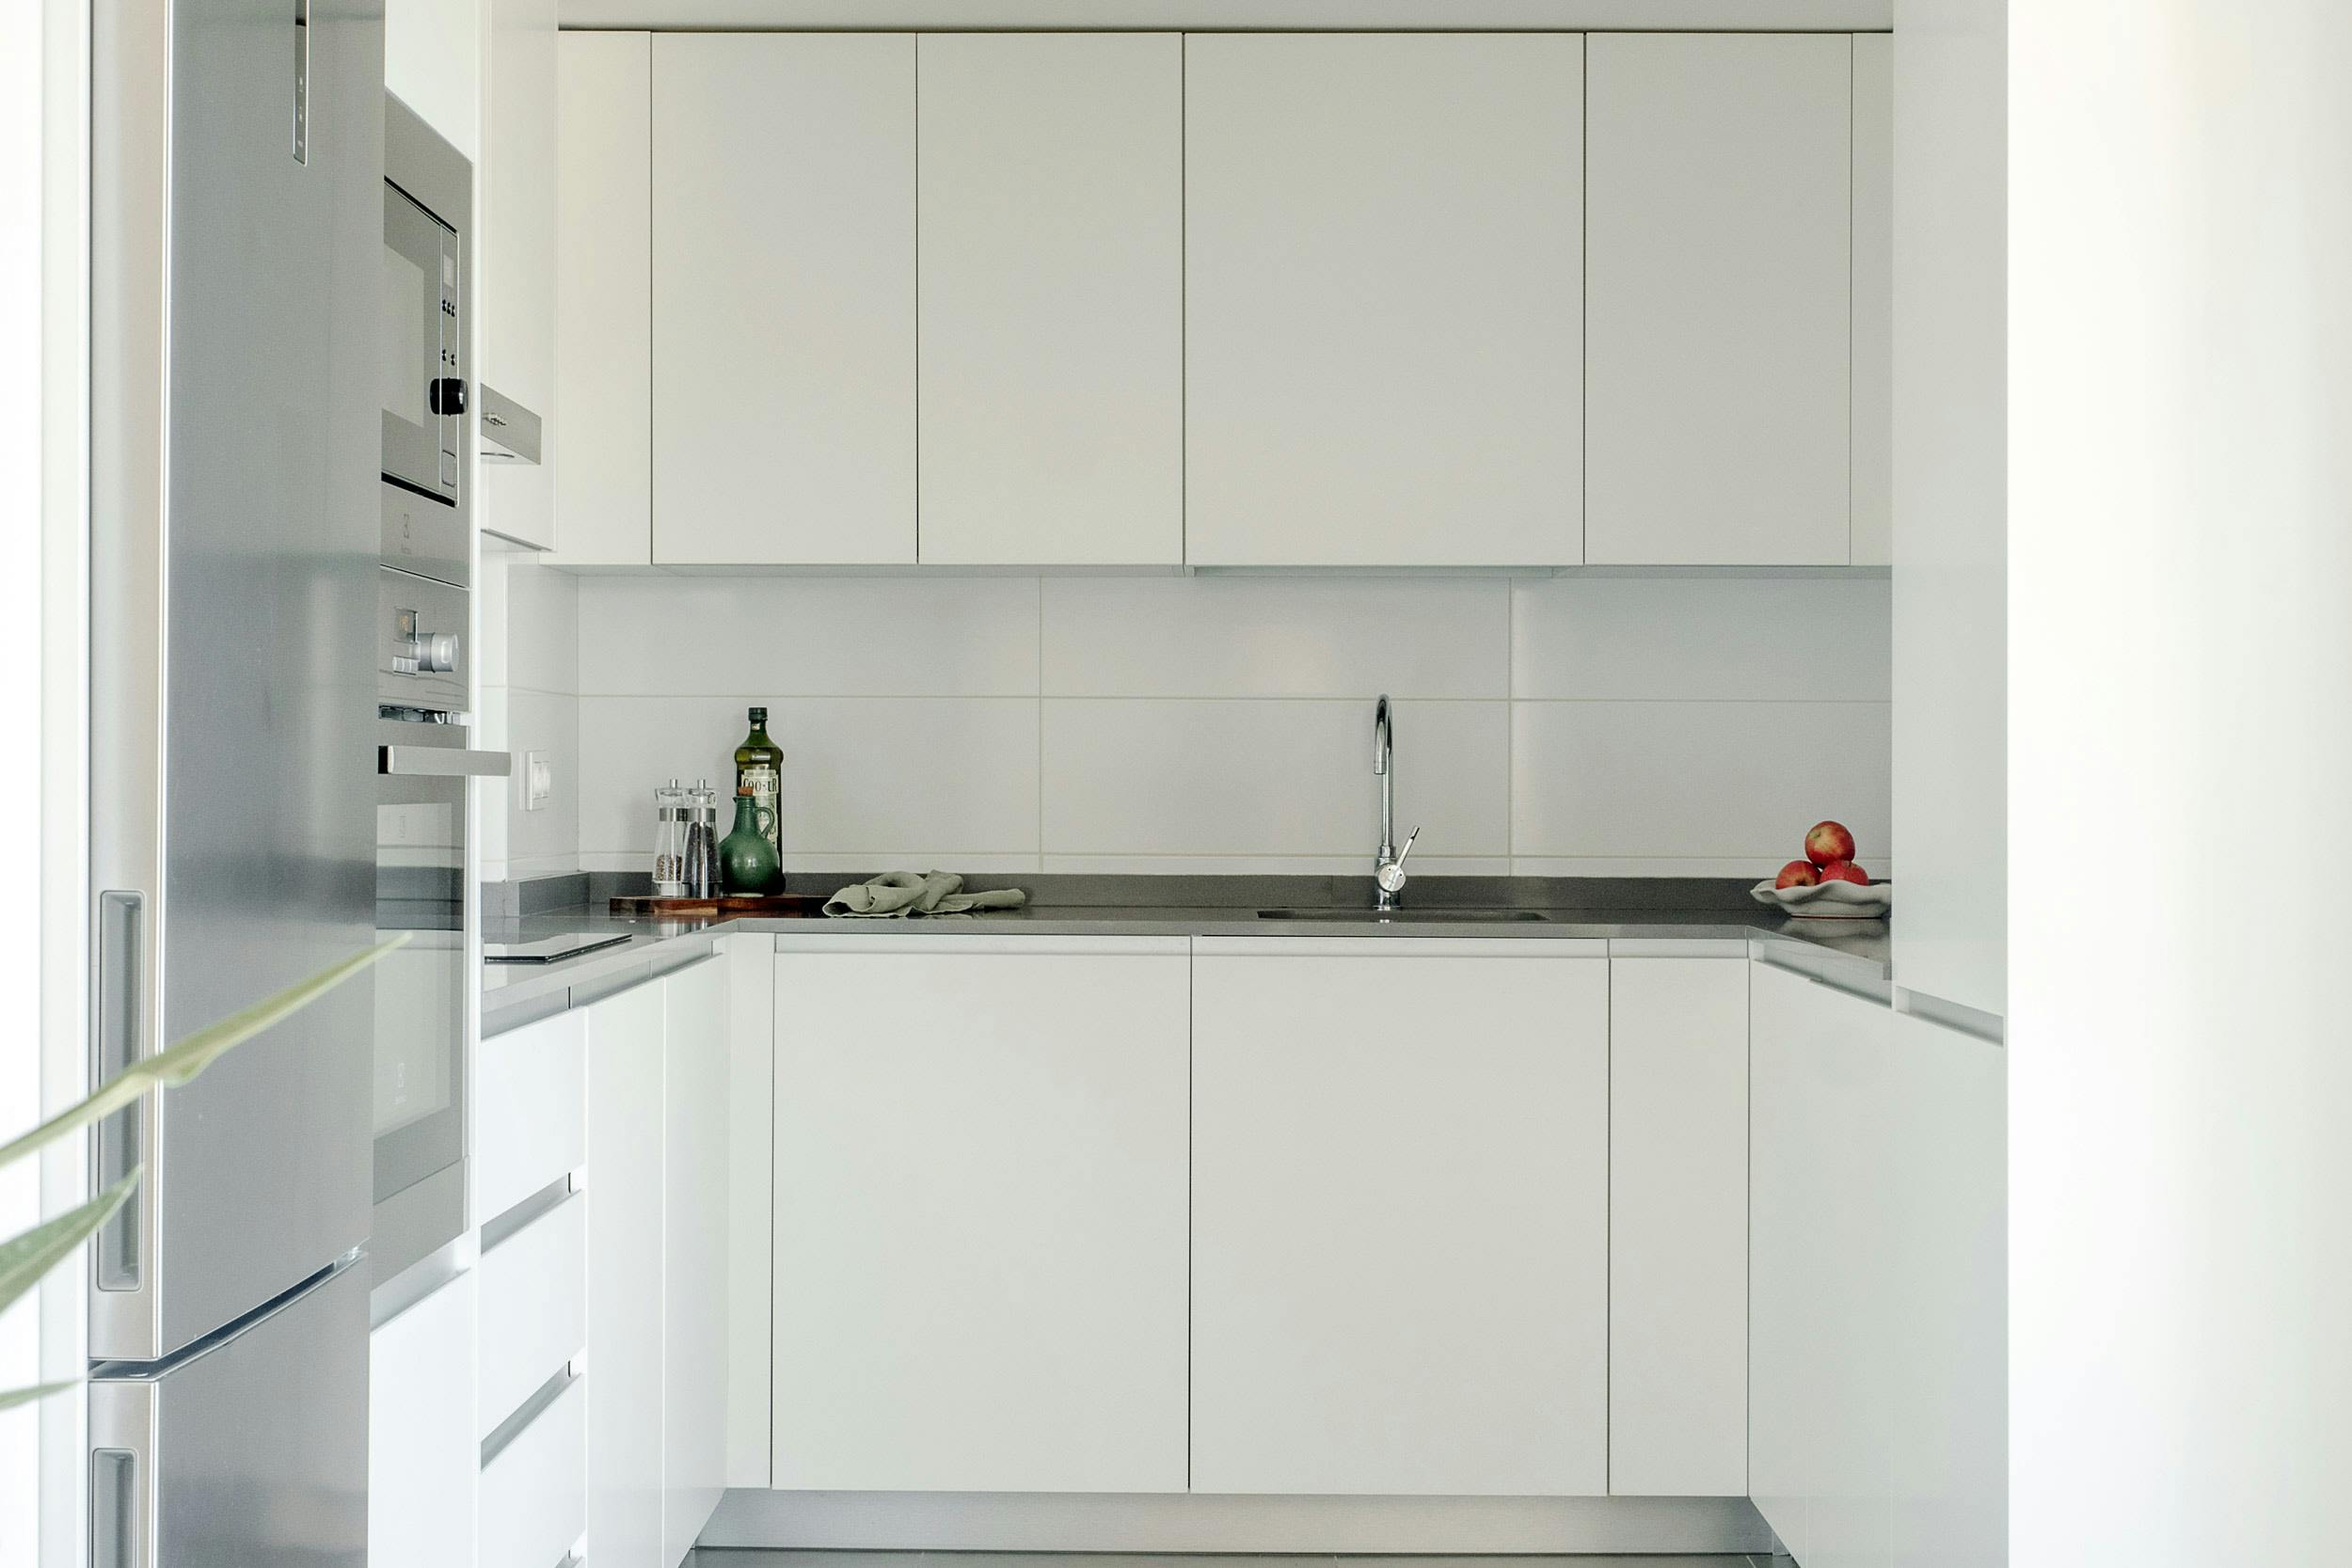 The image features a clean, white kitchen with a stainless steel sink, a white countertop, and a white cabinet.